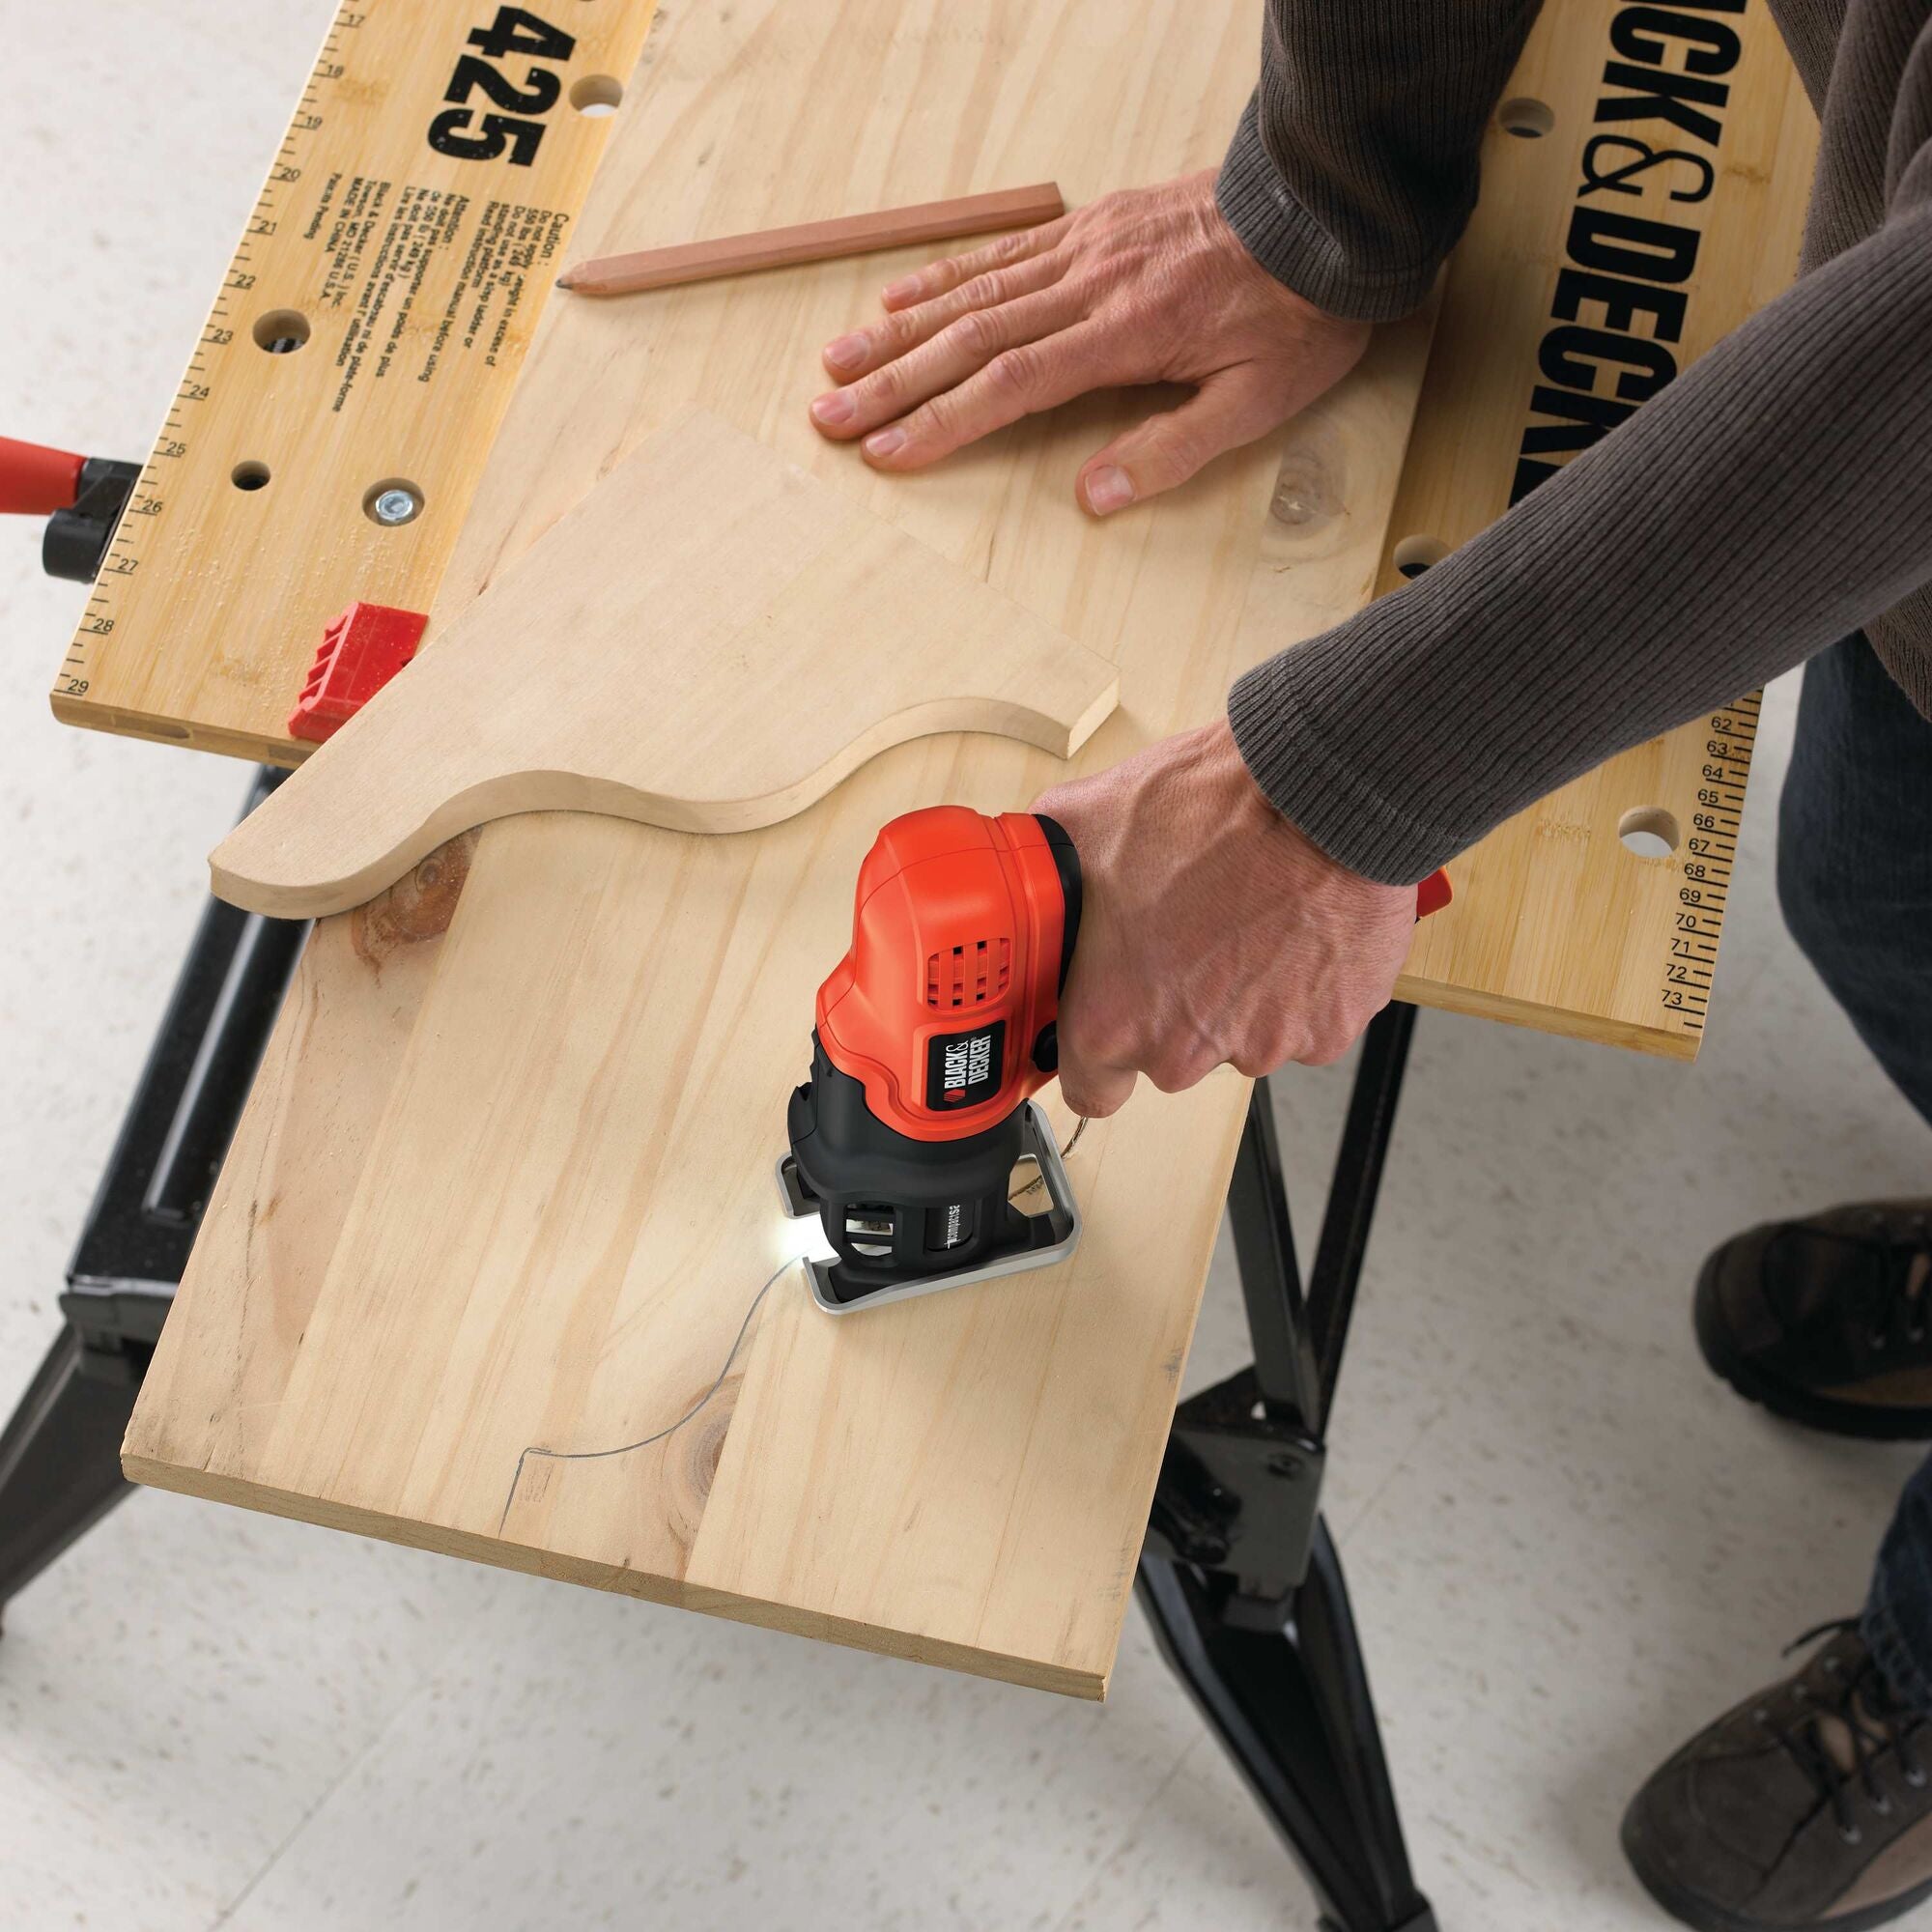 Compact saw with lithium ion battery being used to cut P V C.